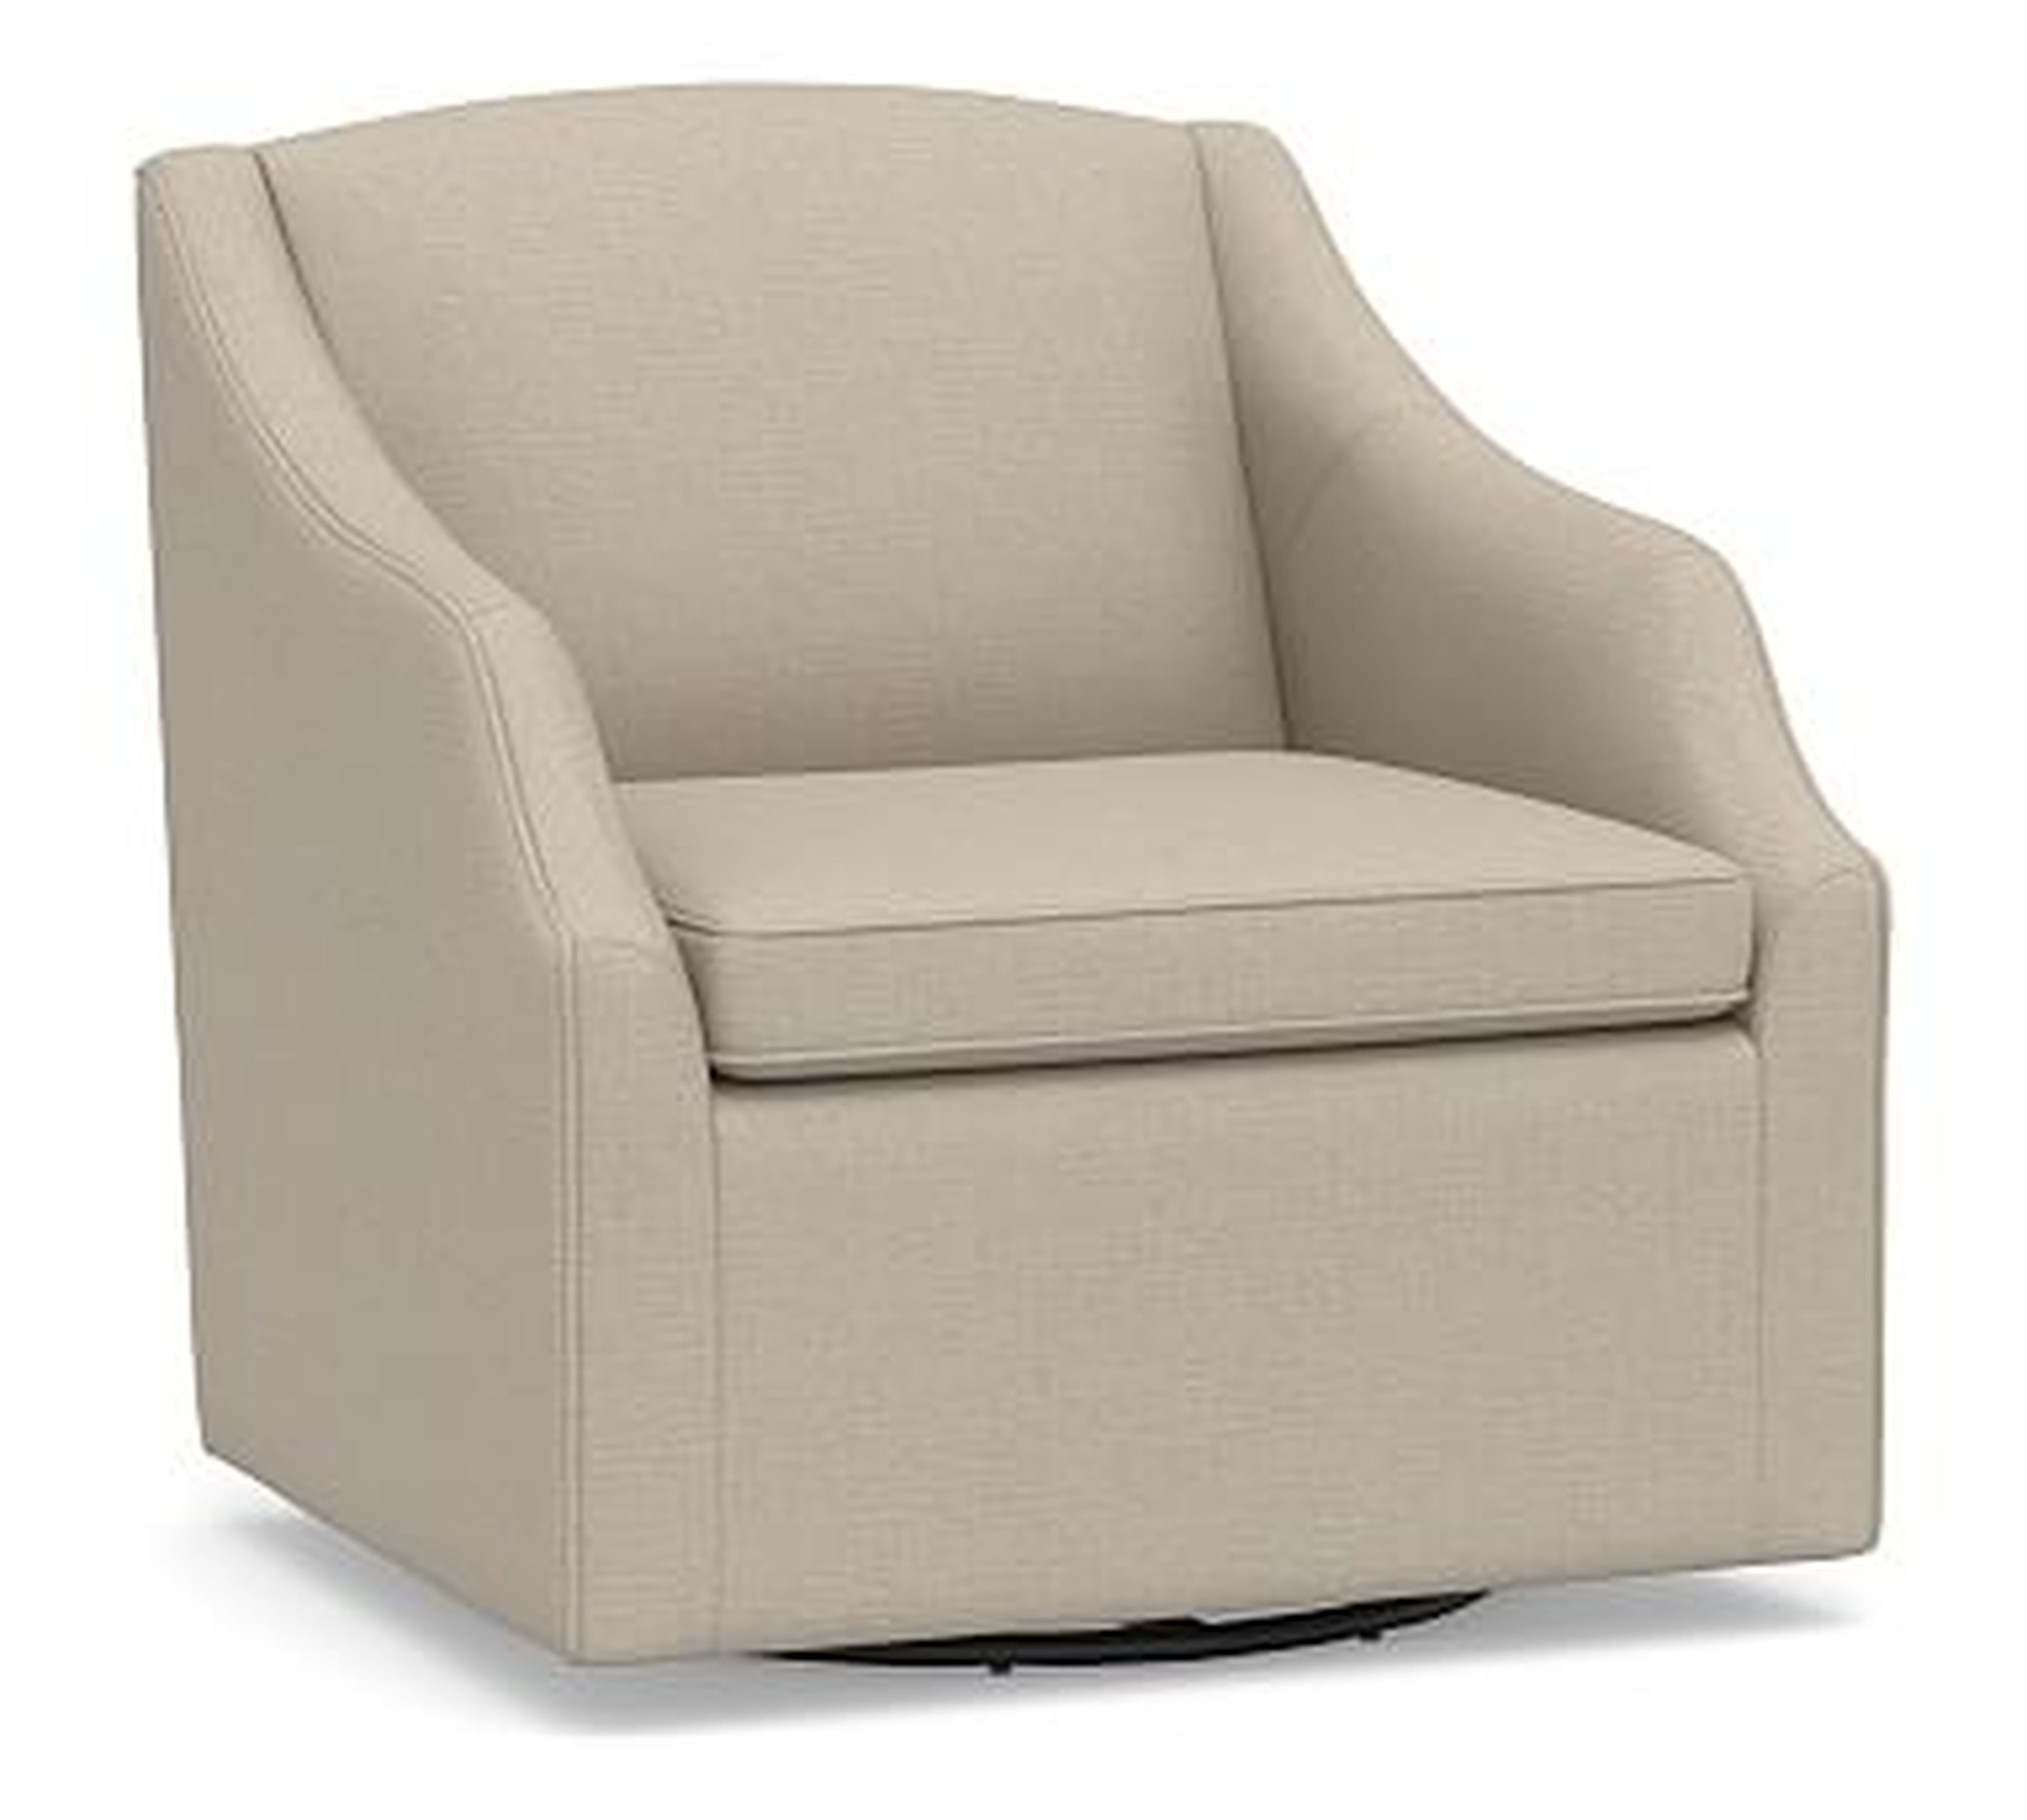 SoMa Emma Upholstered Swivel Armchair, Polyester Wrapped Cushions, Brushed Crossweave Natural - Pottery Barn